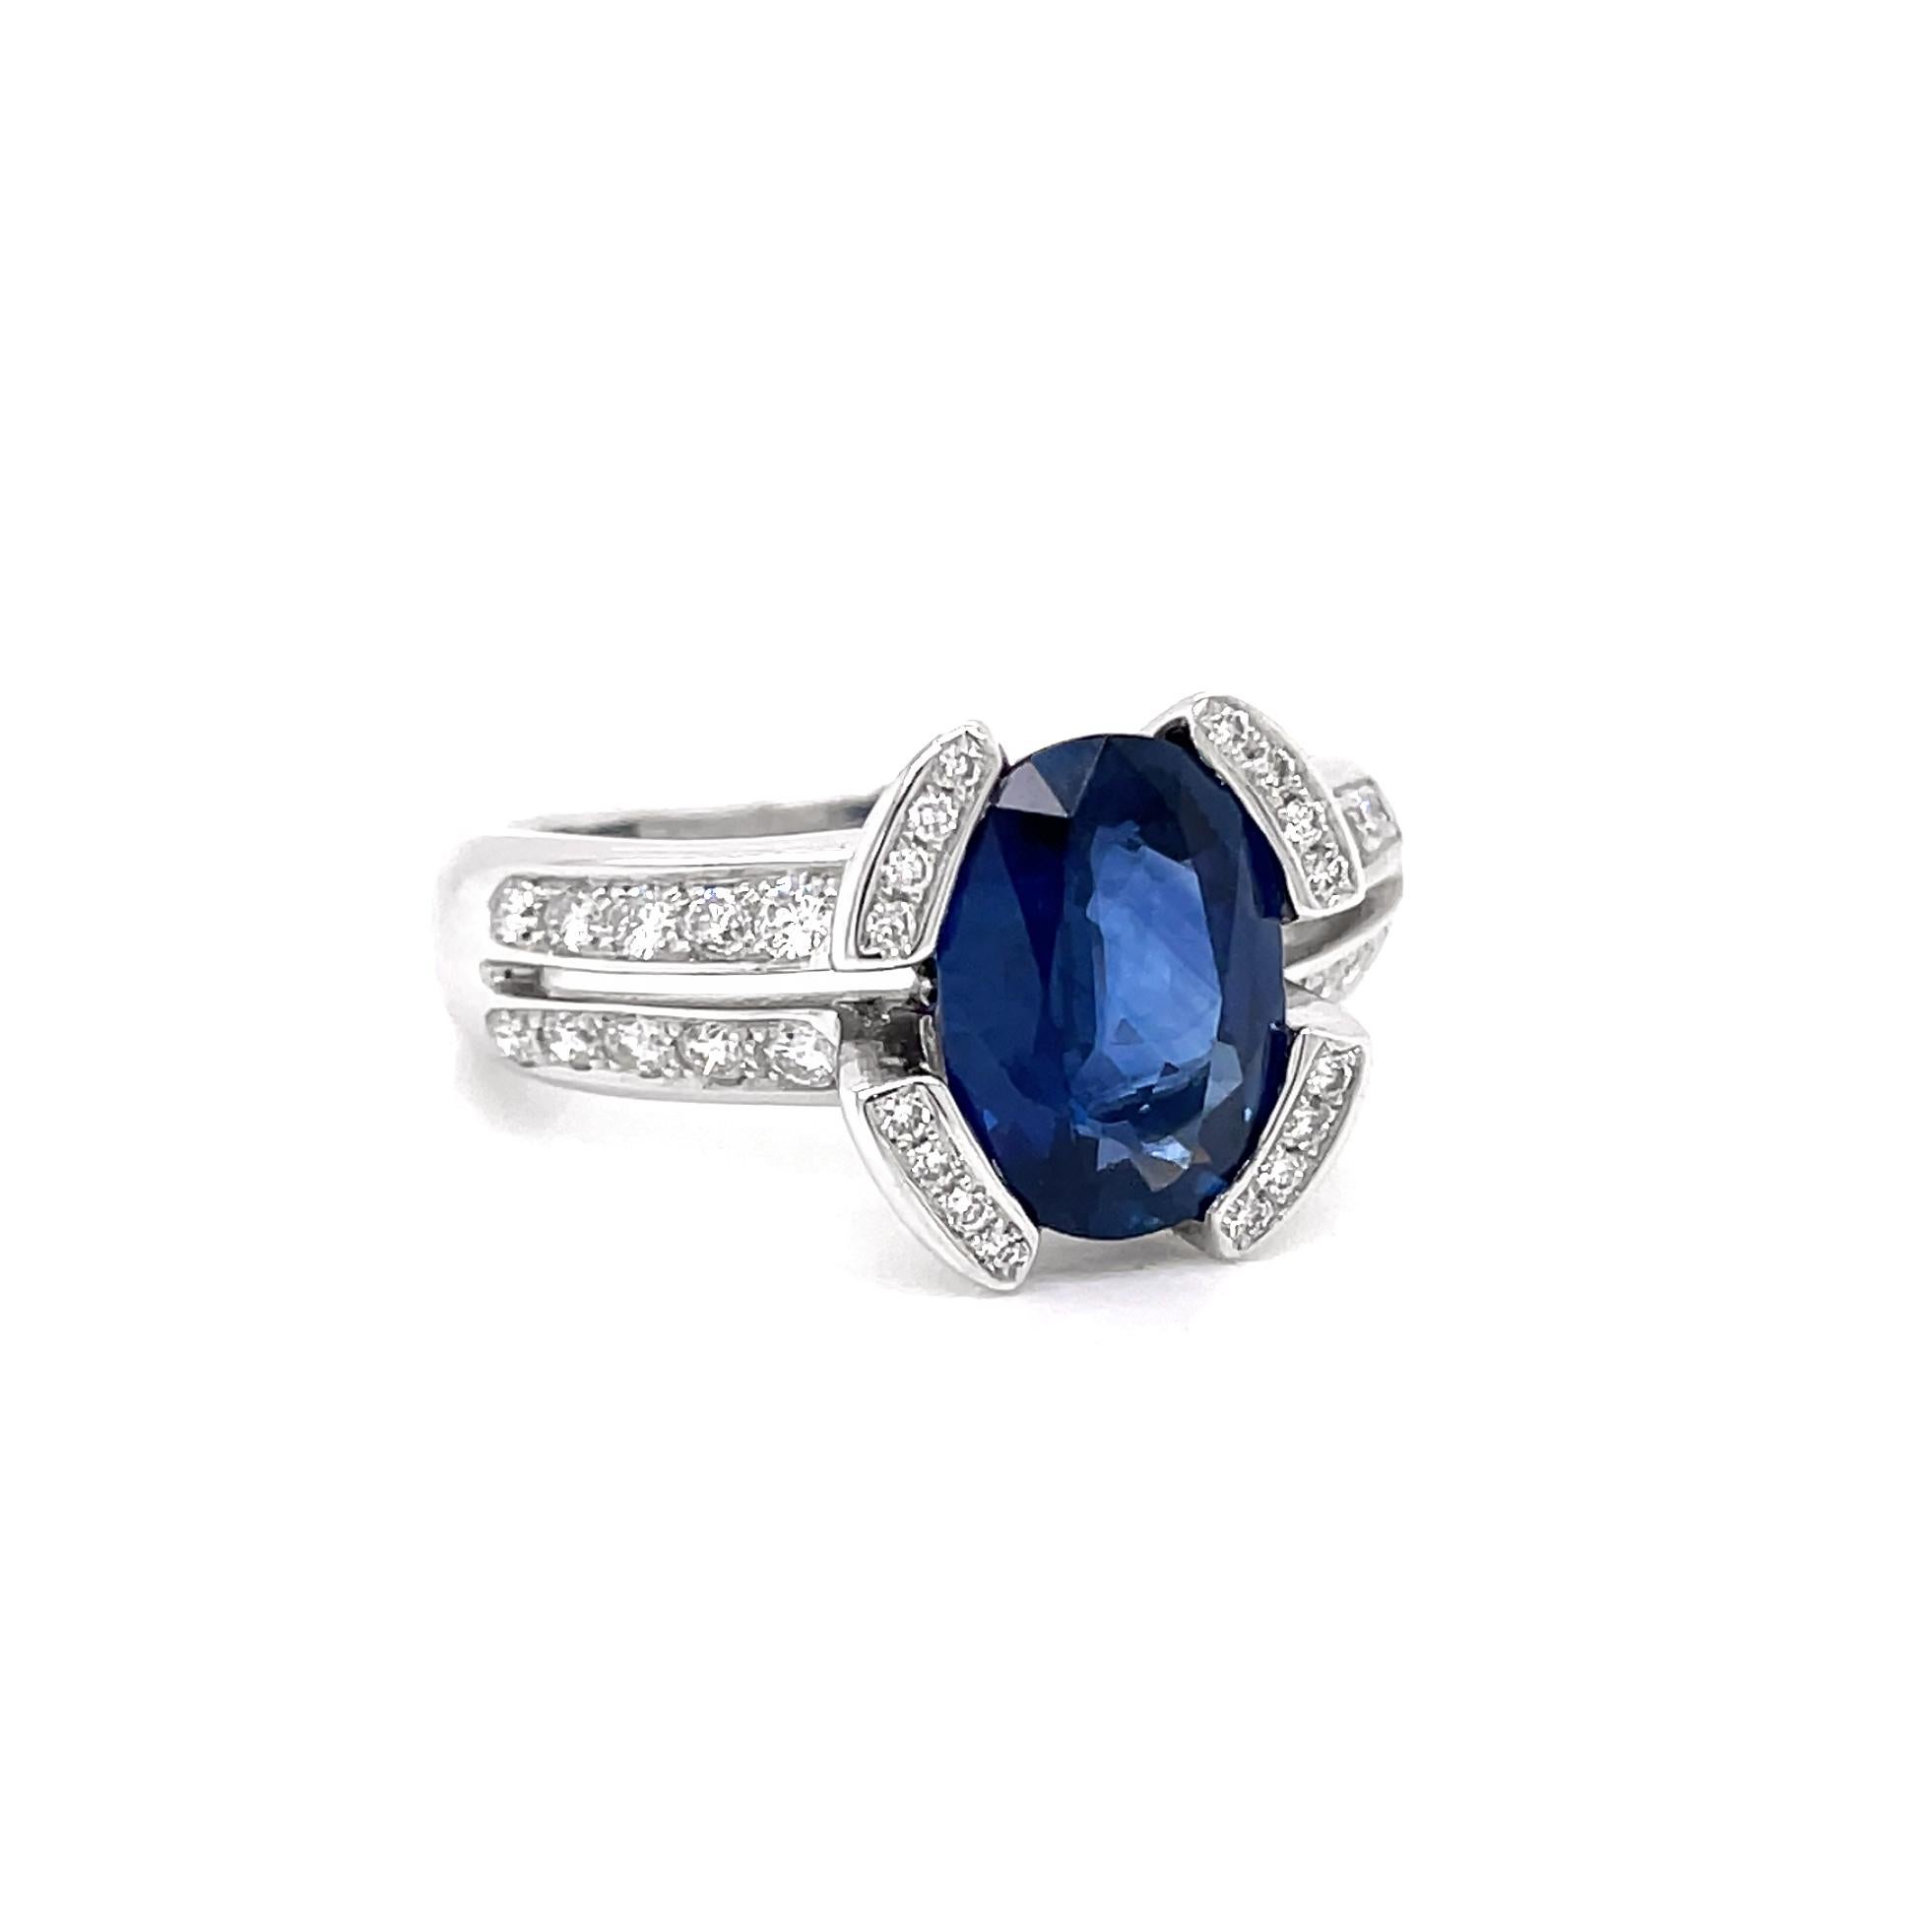 This beautiful ring features an oval 2.75ct royal blue sapphire mounted in a semi rub-over setting and split shoulder shank. The collet is split in four sections, all grain set with four round brilliant cut diamonds in each followed by a diamond